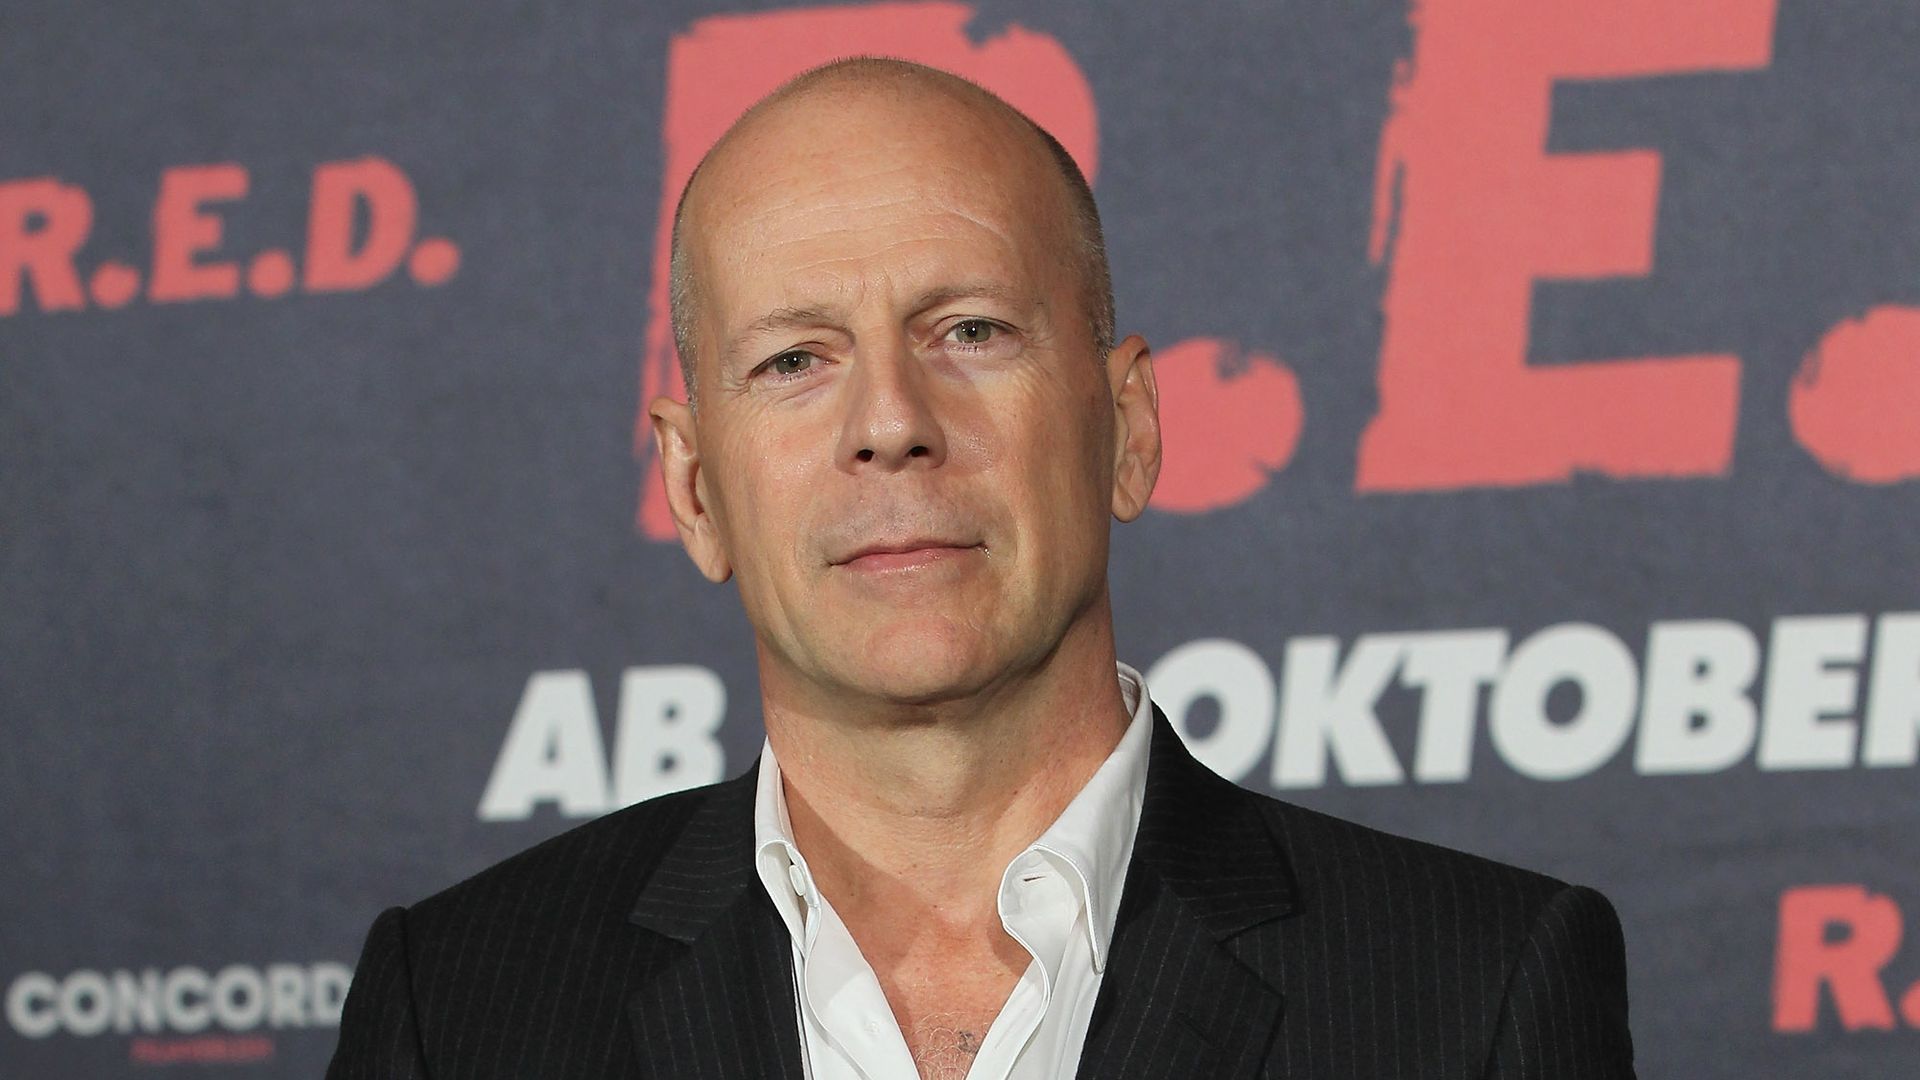 Bruce Willis' former colleague gives bittersweet insight into how his family is coping amid dementia battle